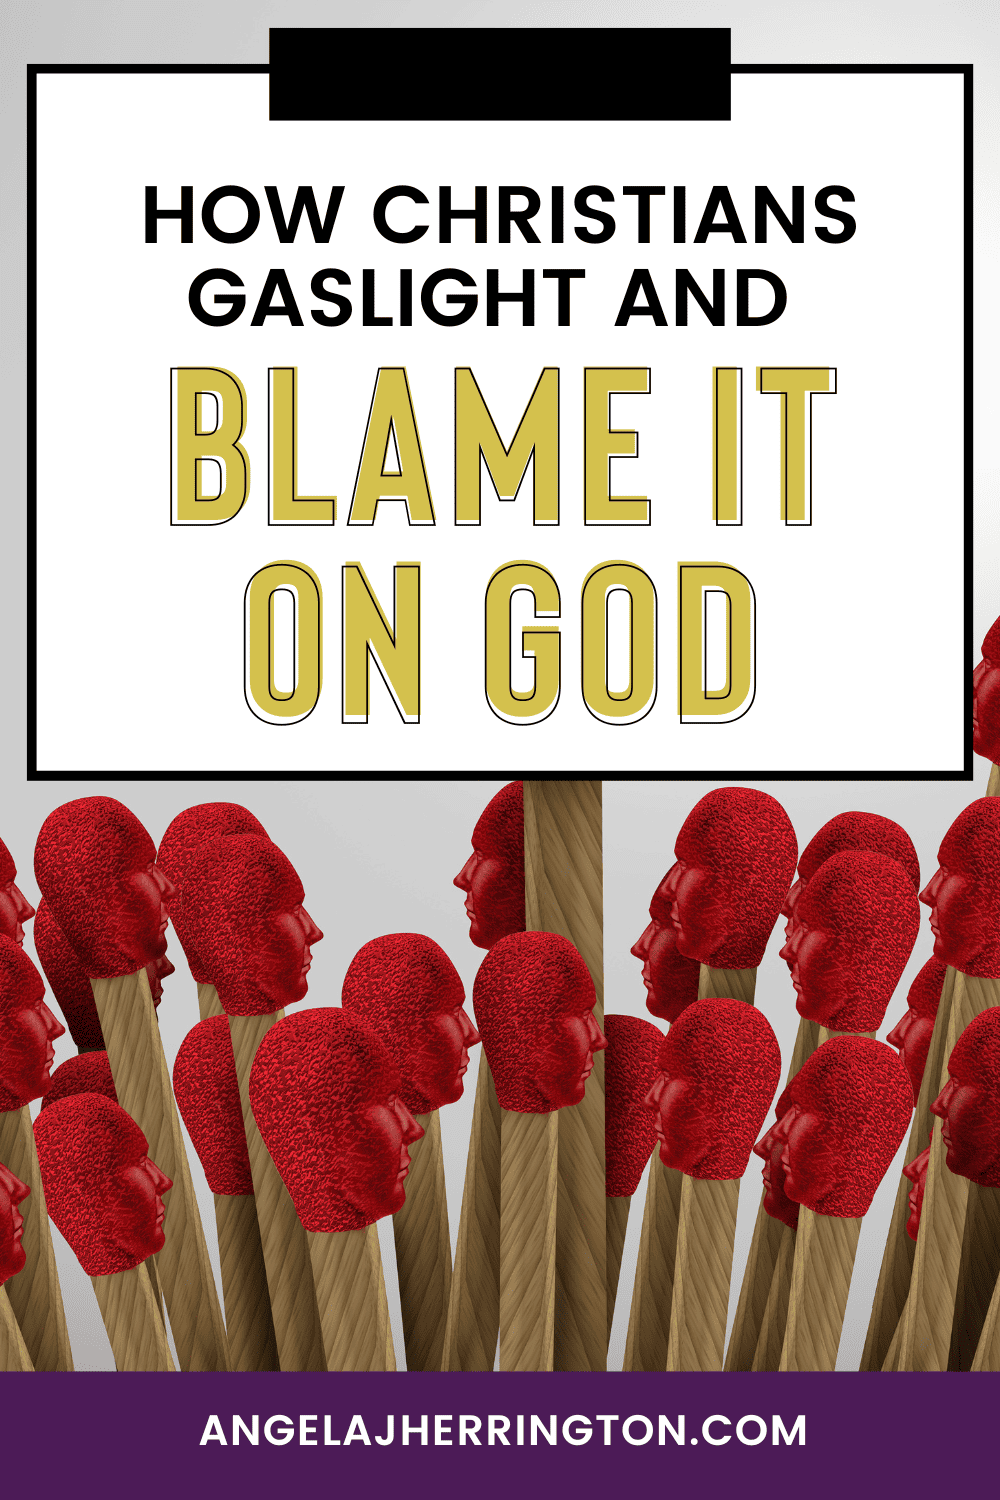  How Christians gaslight and blame it on god within toxic religion